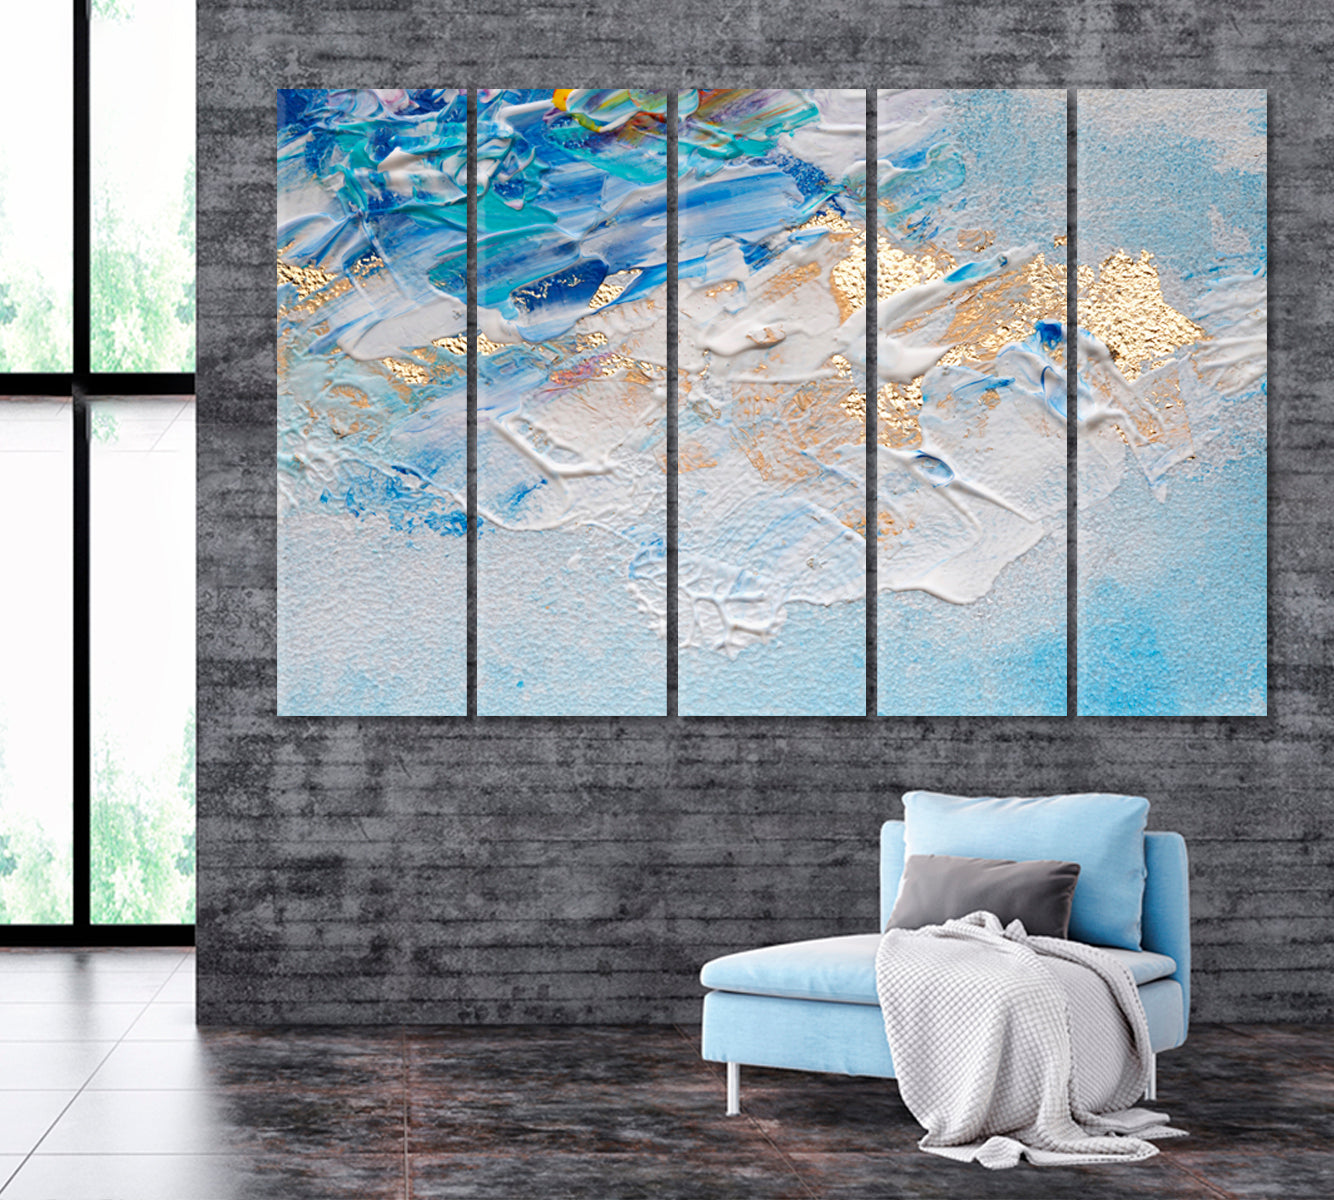 Creative Blue & Gold Painting Canvas Print ArtLexy 5 Panels 36"x24" inches 